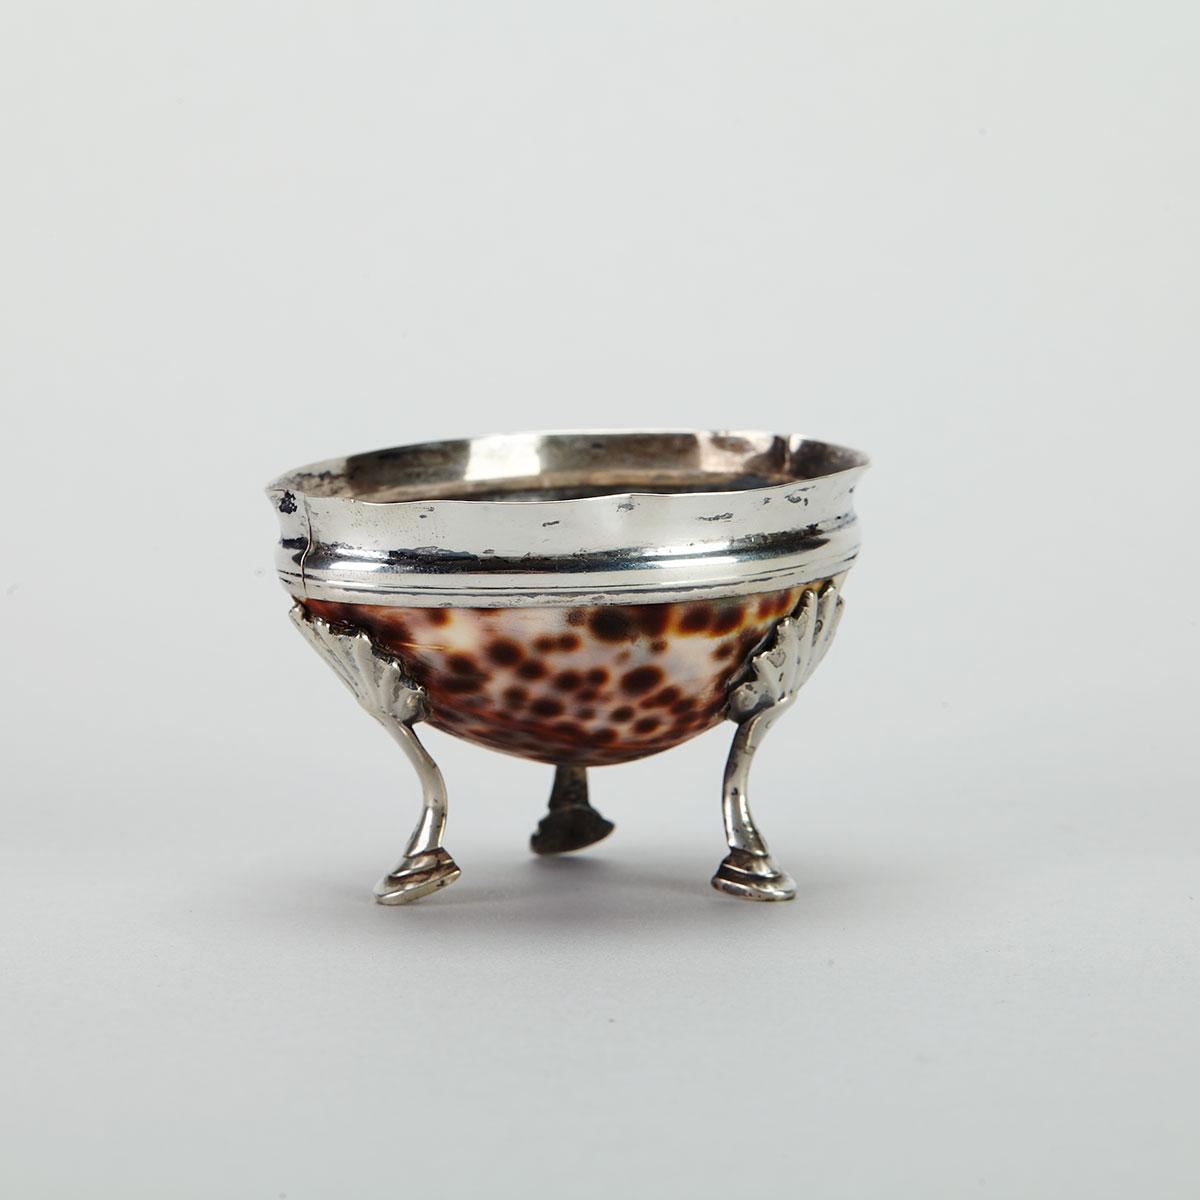 George III Silver Mounted Cowrie Shell Salt Cellar, late 18th century